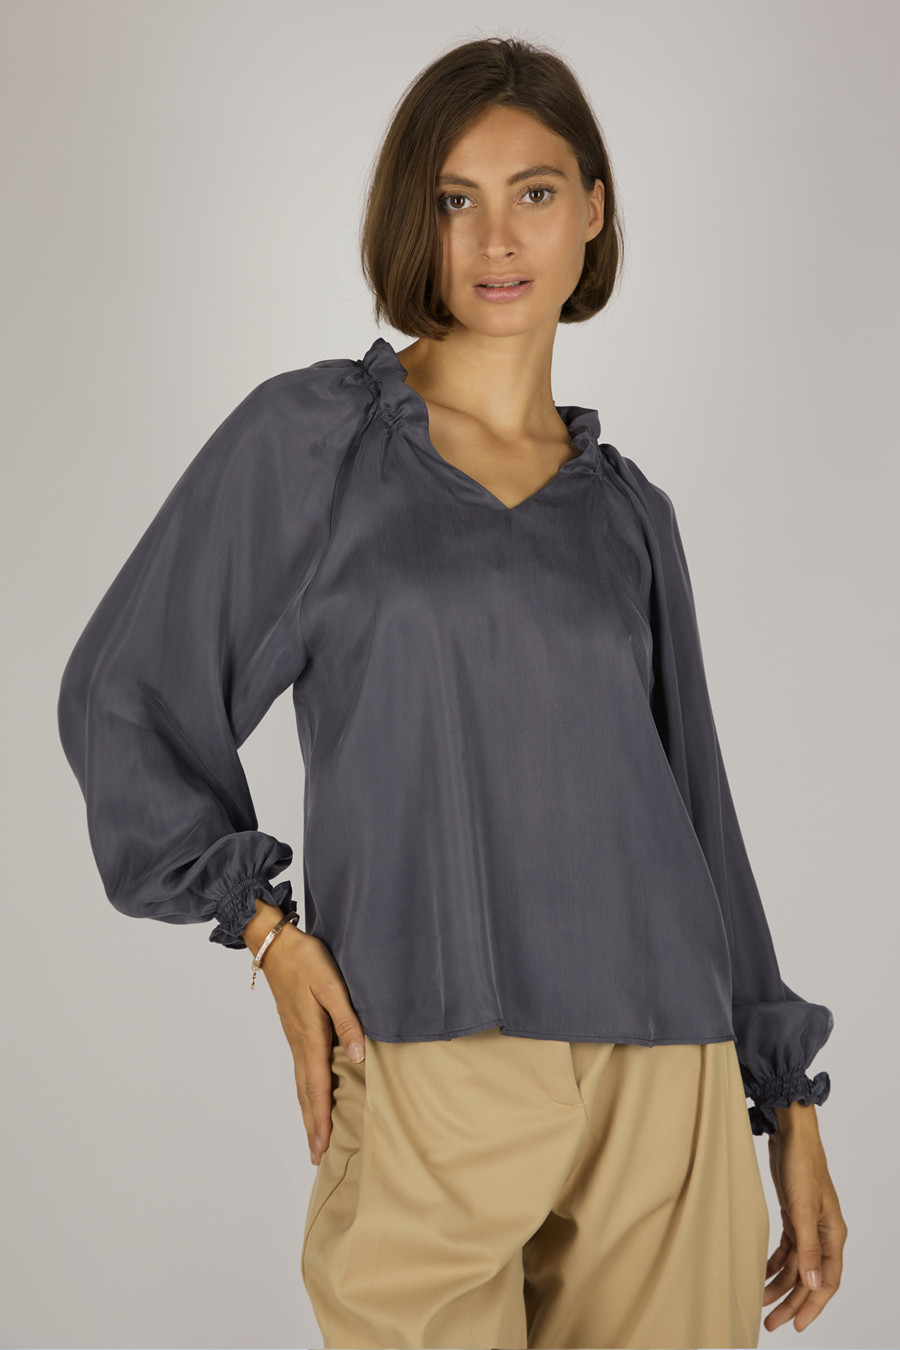 PARIS - Shirt blouse with smocked cuffs - color: slate